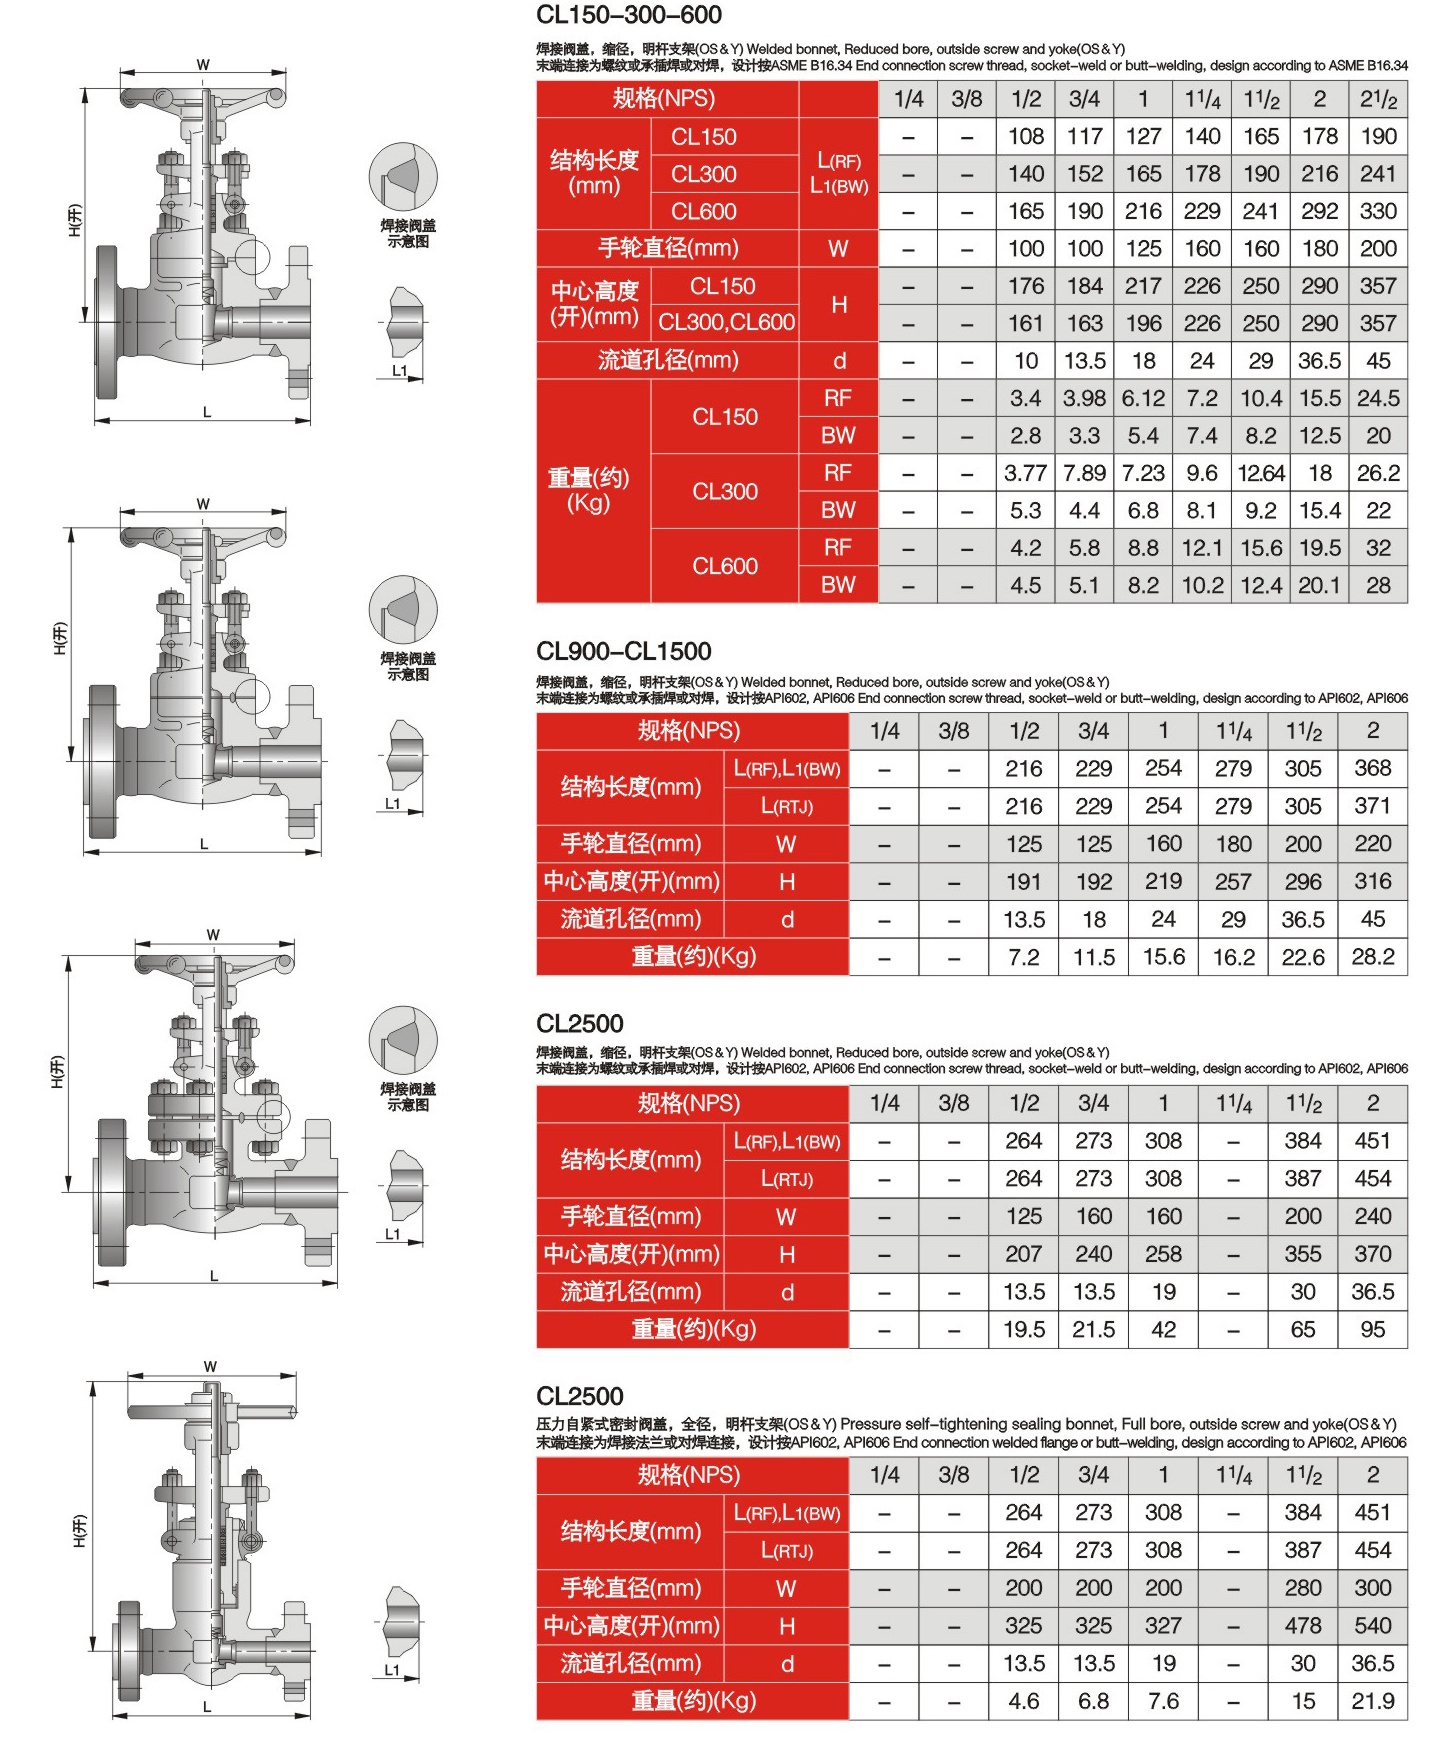 Gate Valve Weight Chart In Lbs